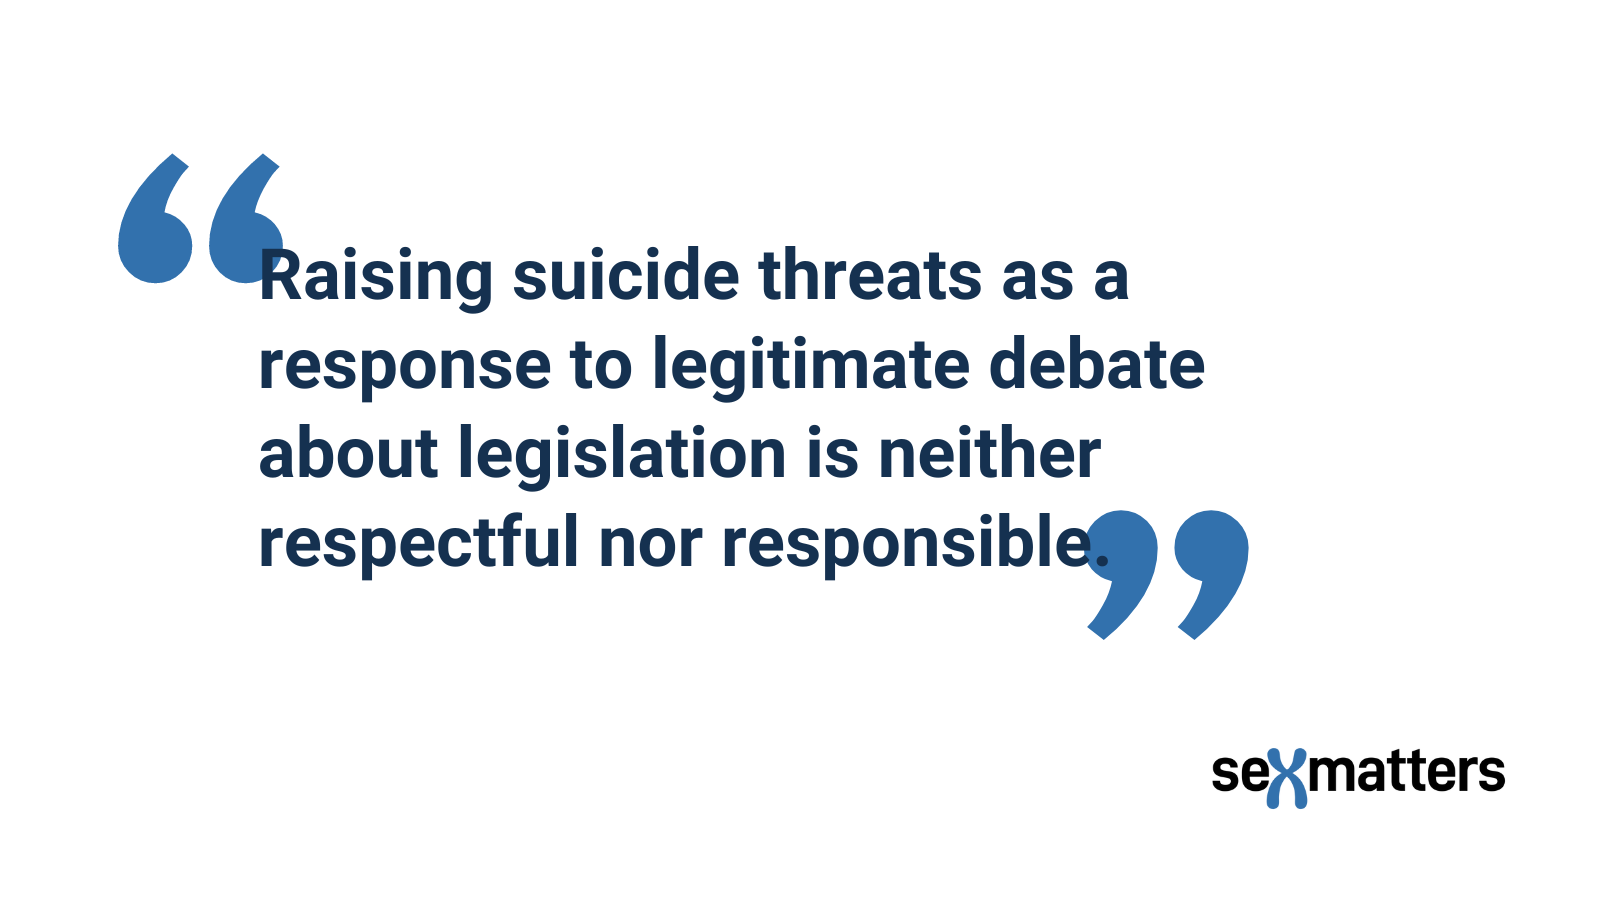 Raising suicide threats as a response to legitimate debate about legislation is neither respectful nor responsible.